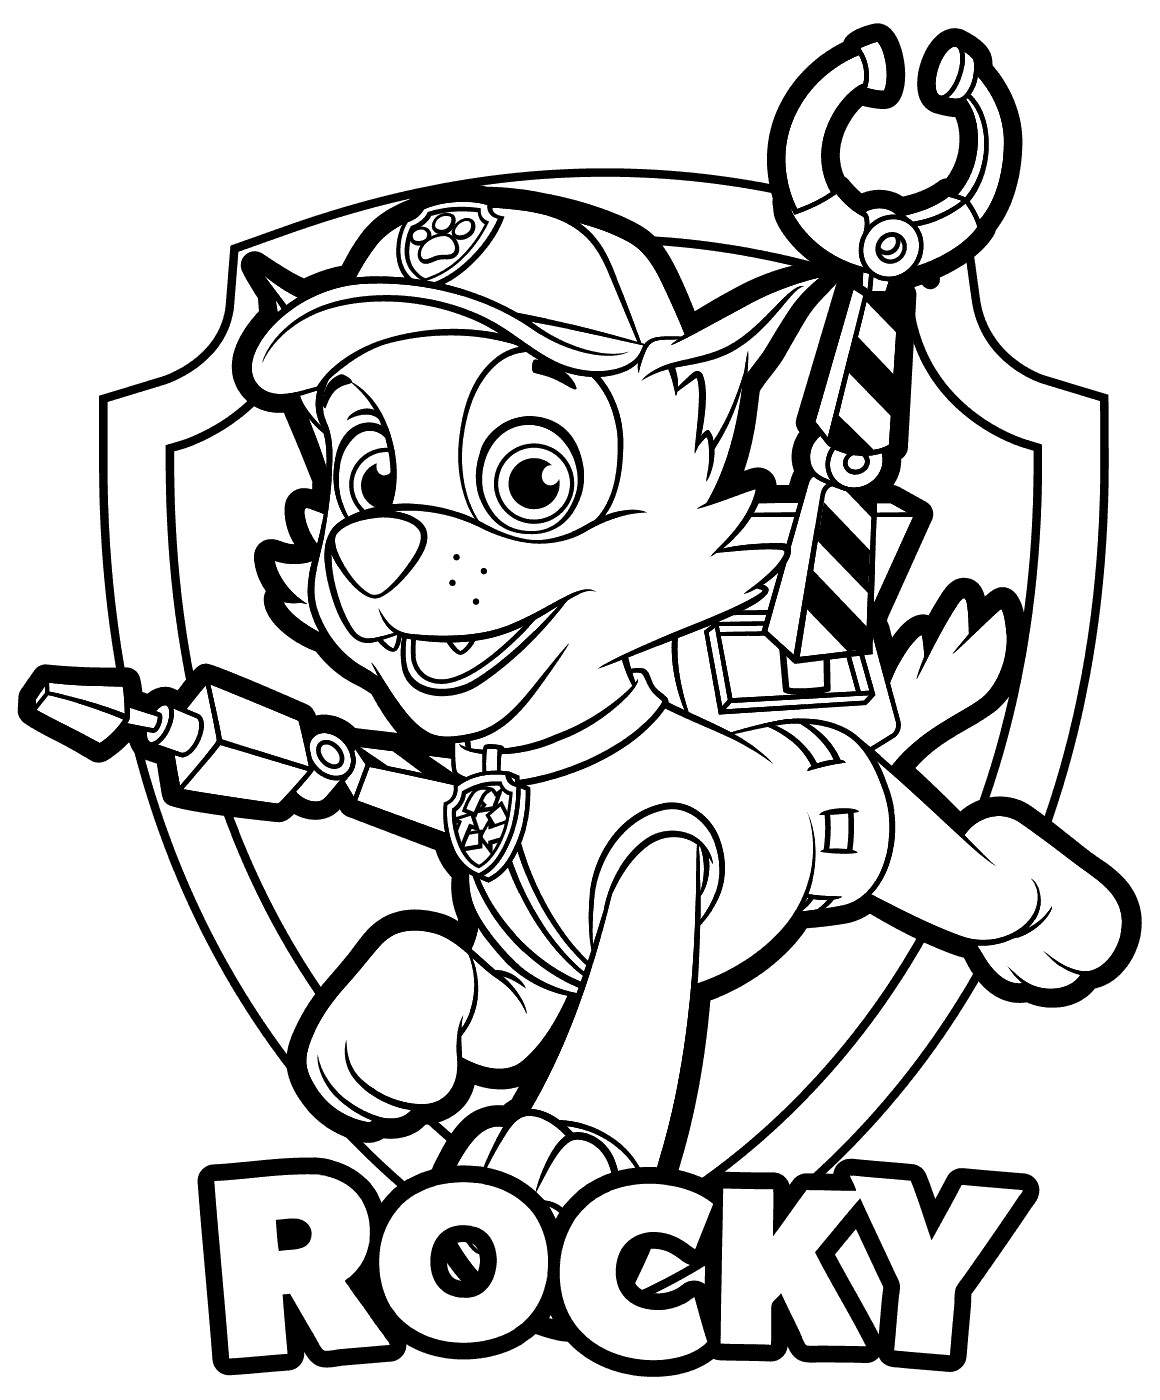 Coloring Pages Boys Paw Patrol Easter
 Paw Patrol Coloring Pages